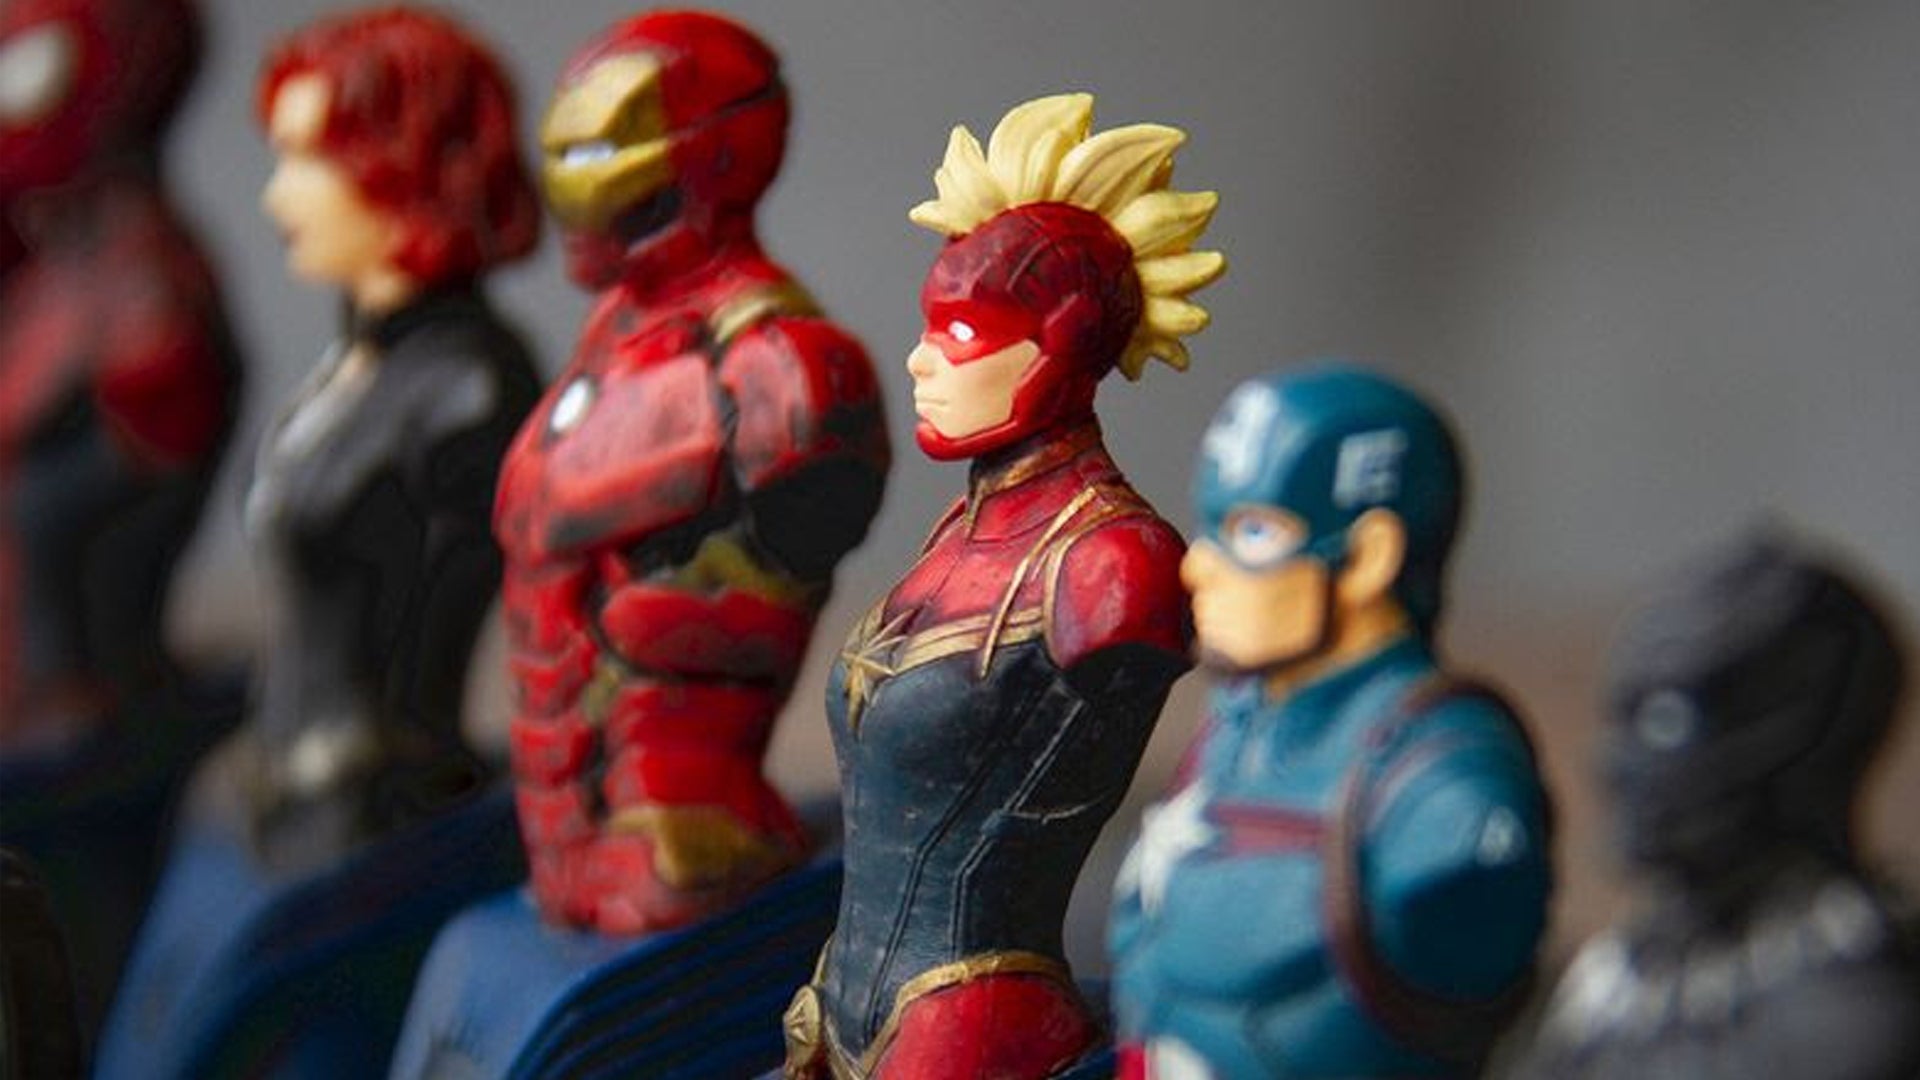 Marvel Collector’s Chess Set pits the Avengers against